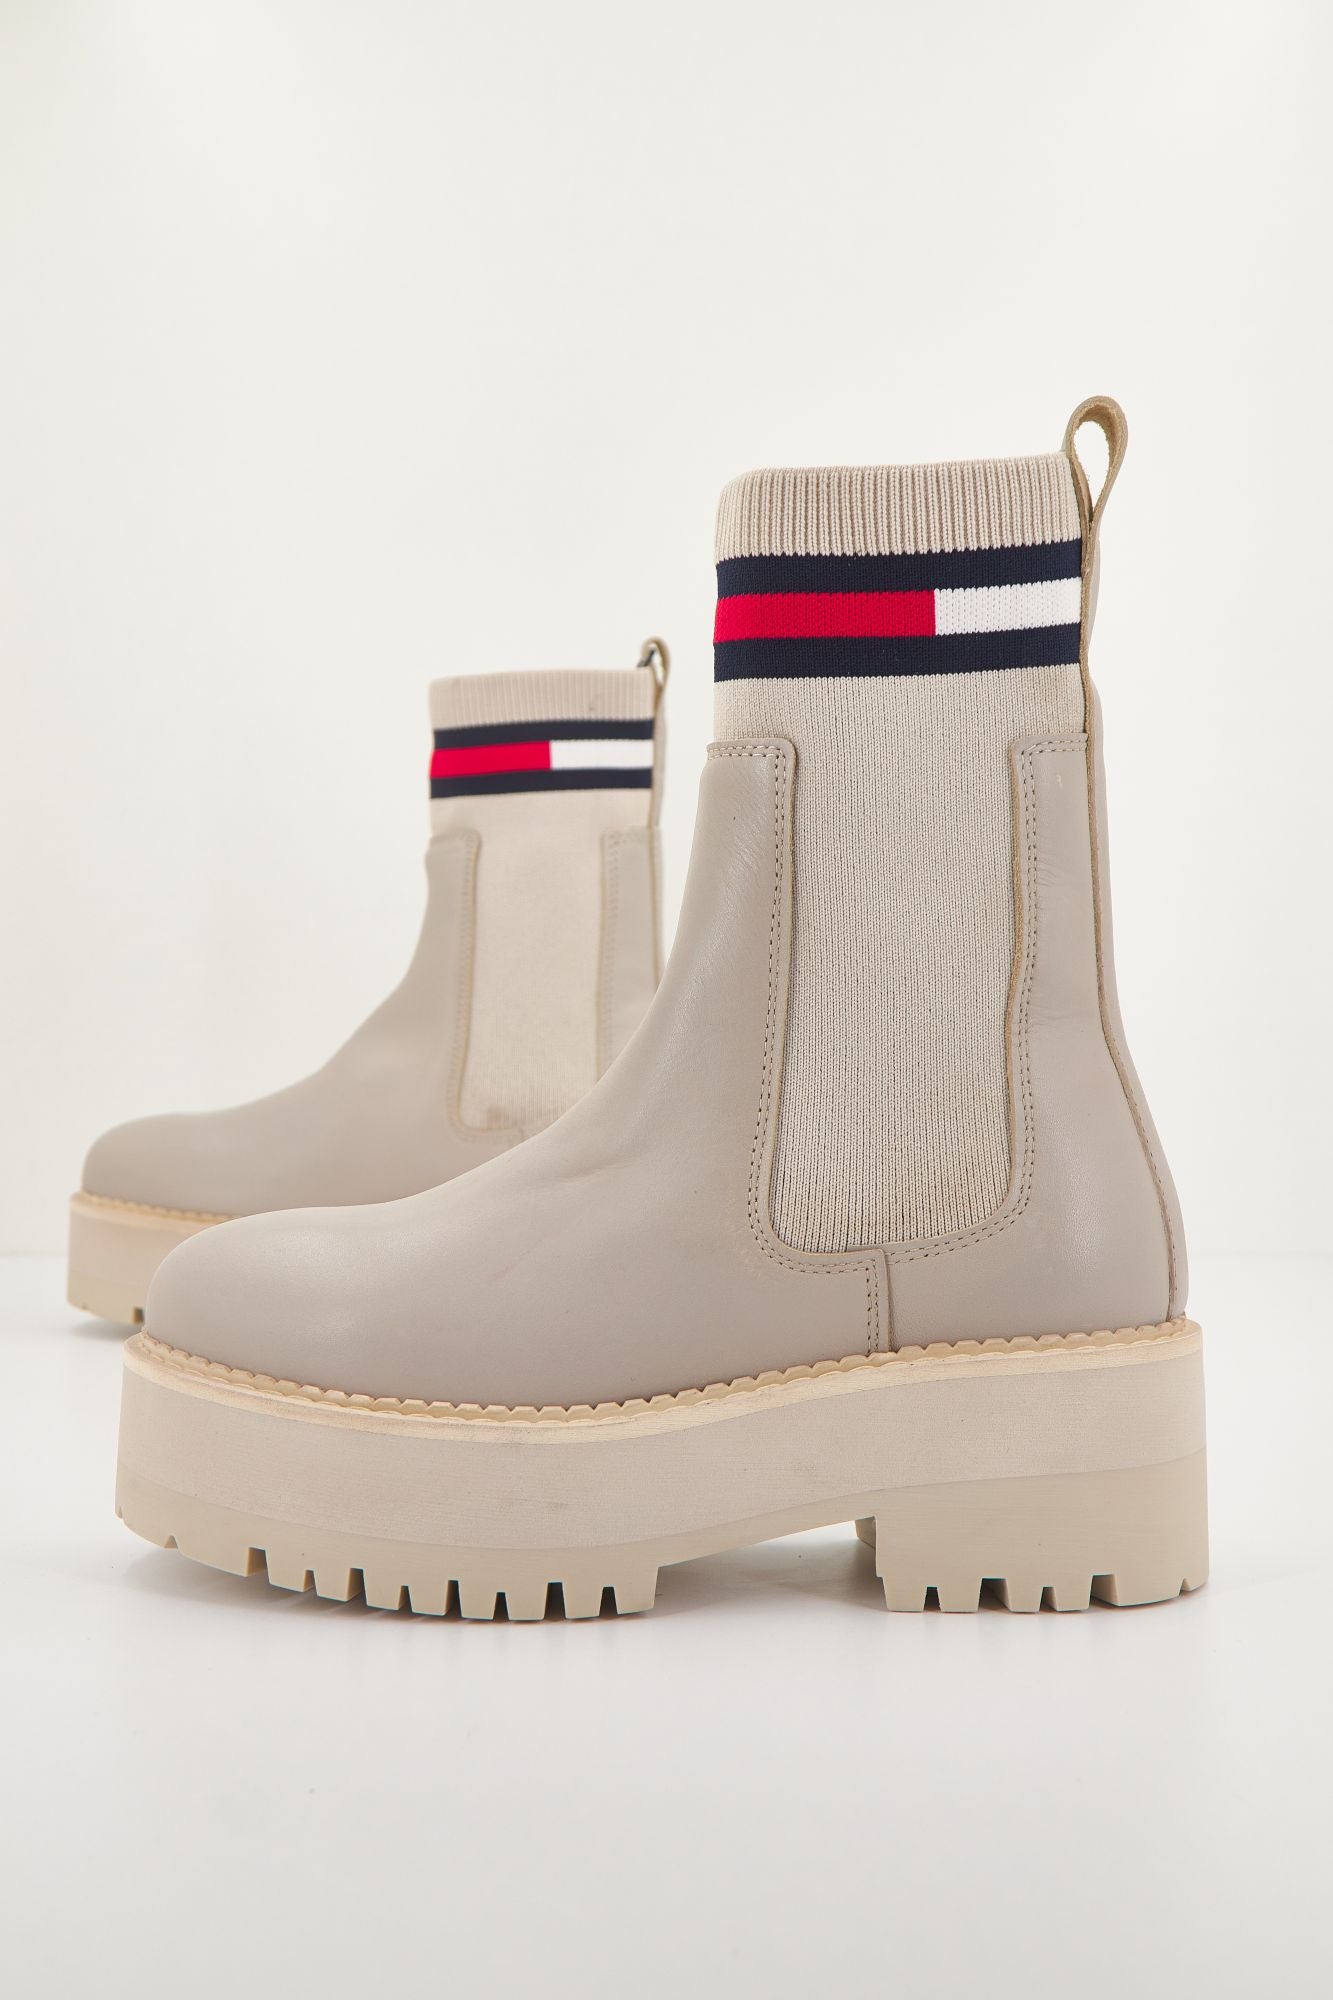 TOMMY JEANS TAMY HIGHER - 2A CHELSEA en color BEIS (2)